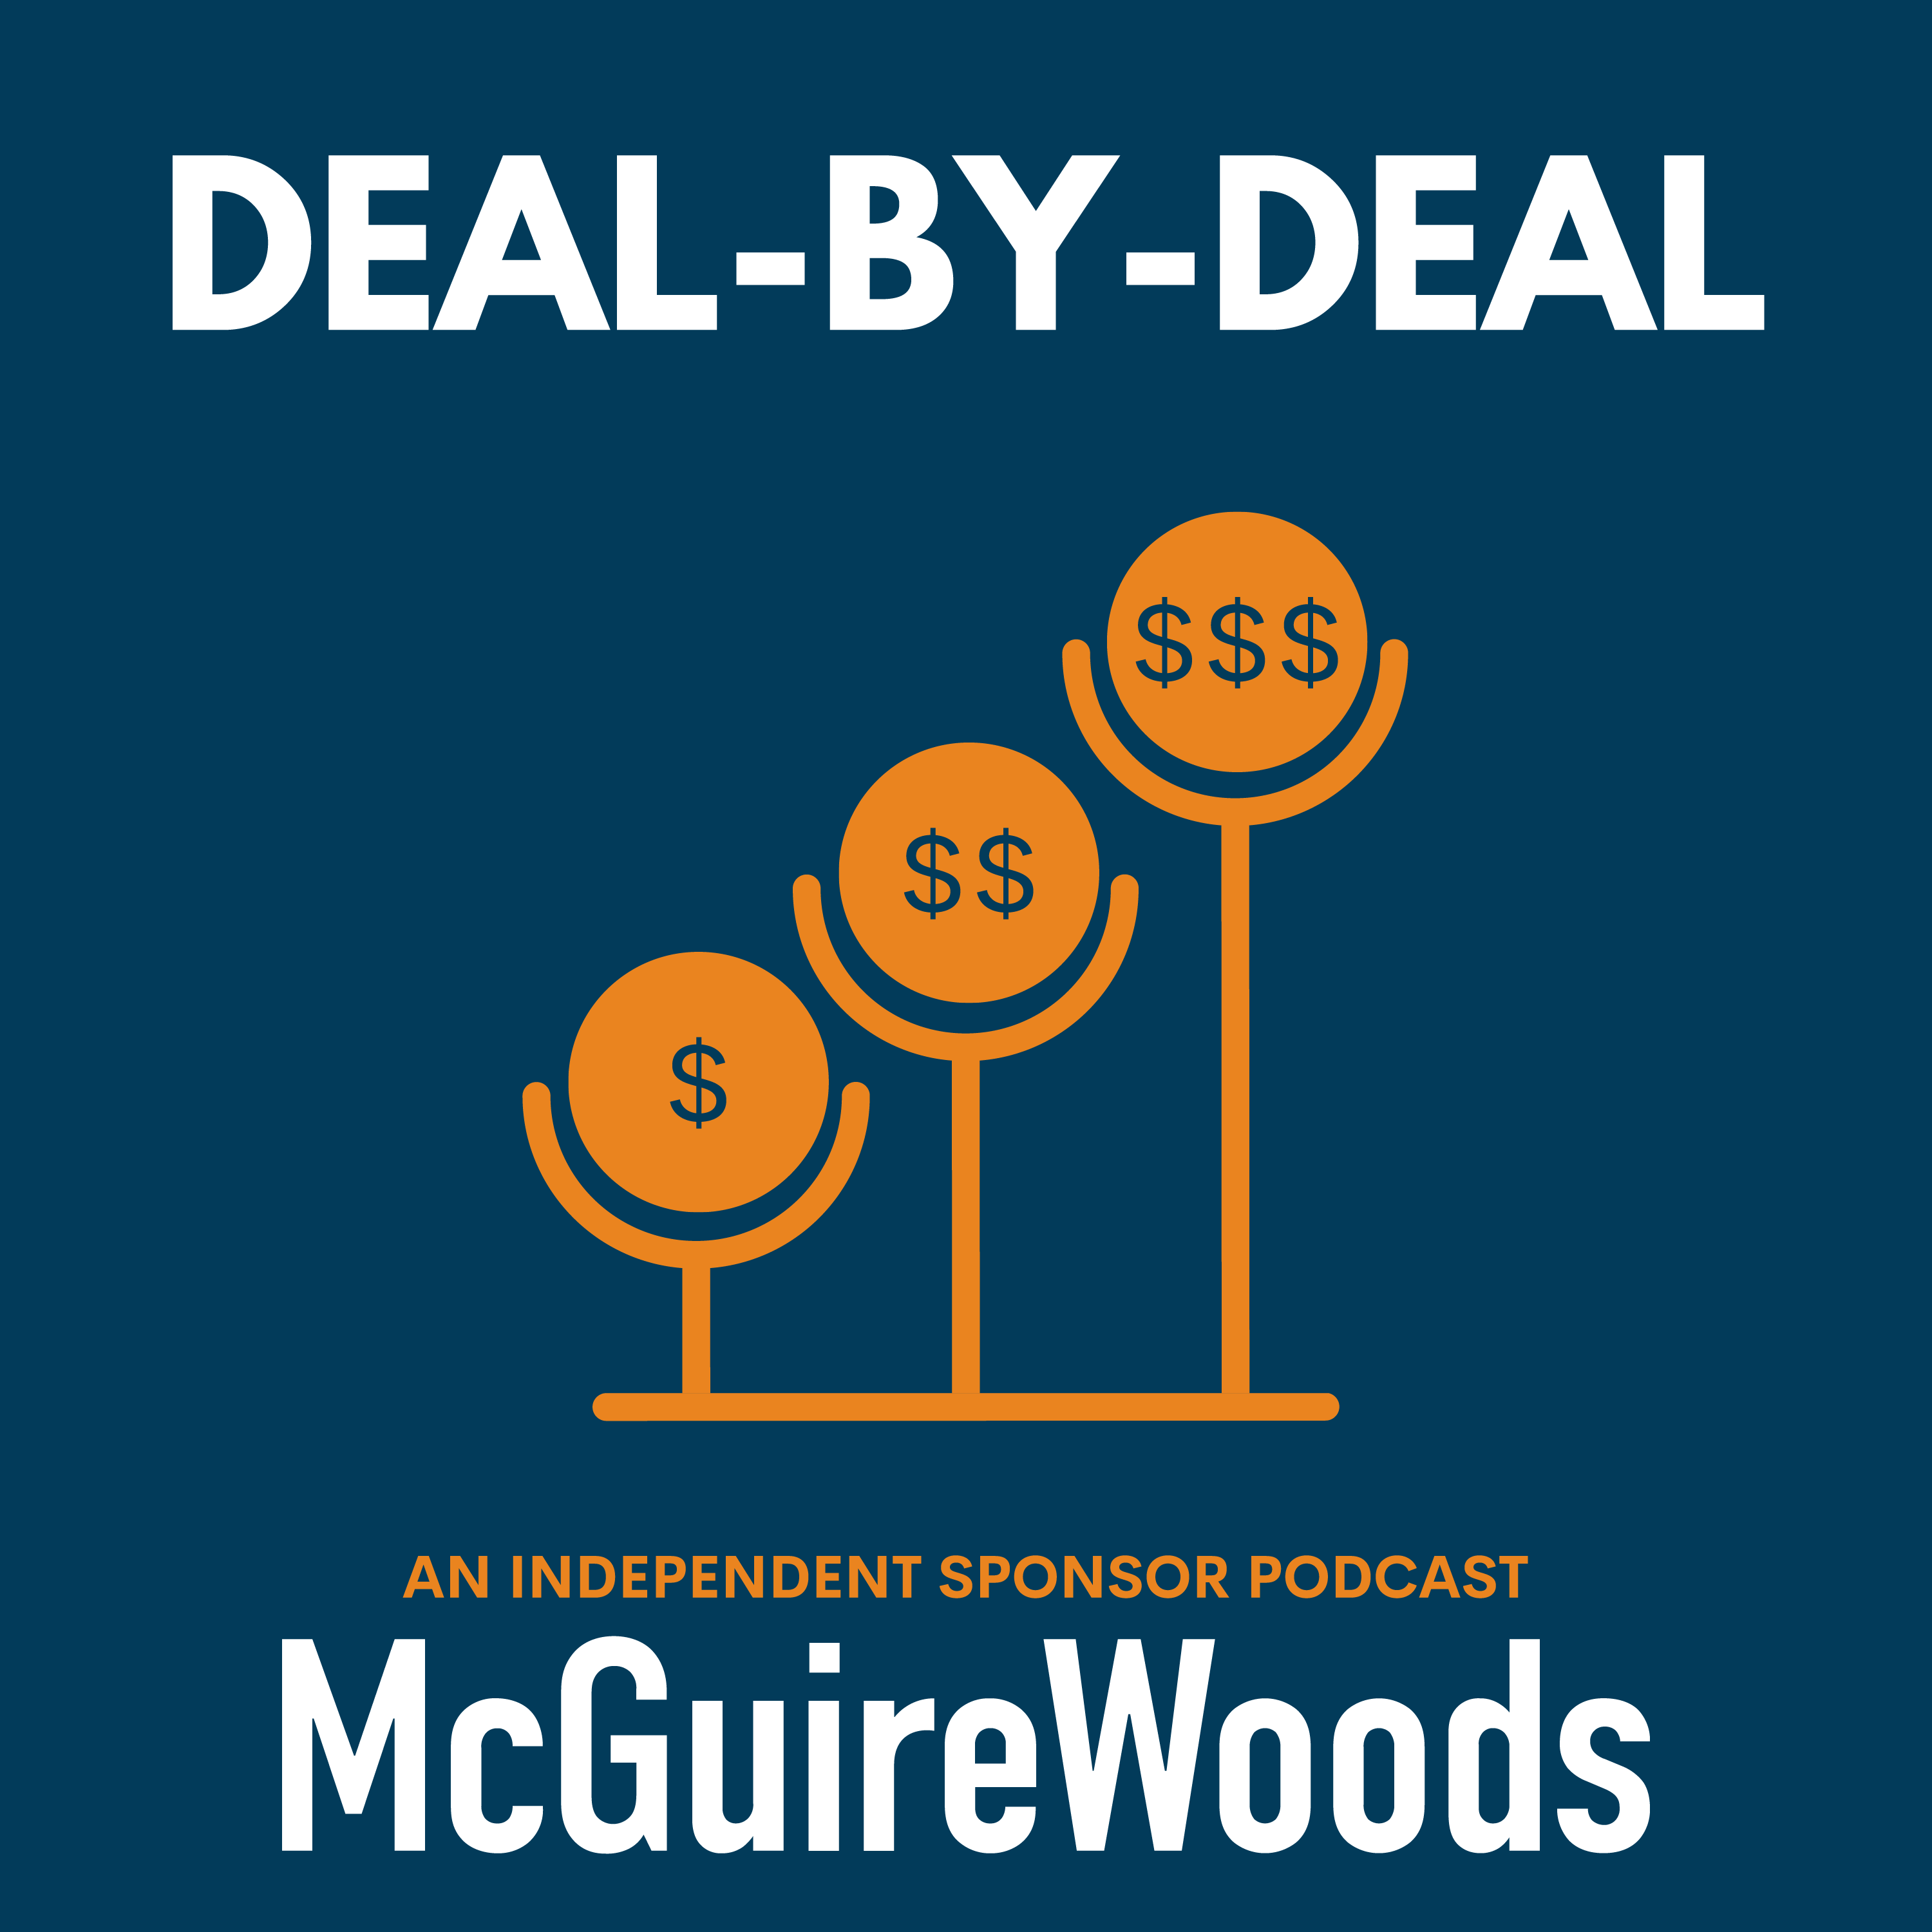 Artwork for podcast Deal-by-Deal: An Independent Sponsor Podcast